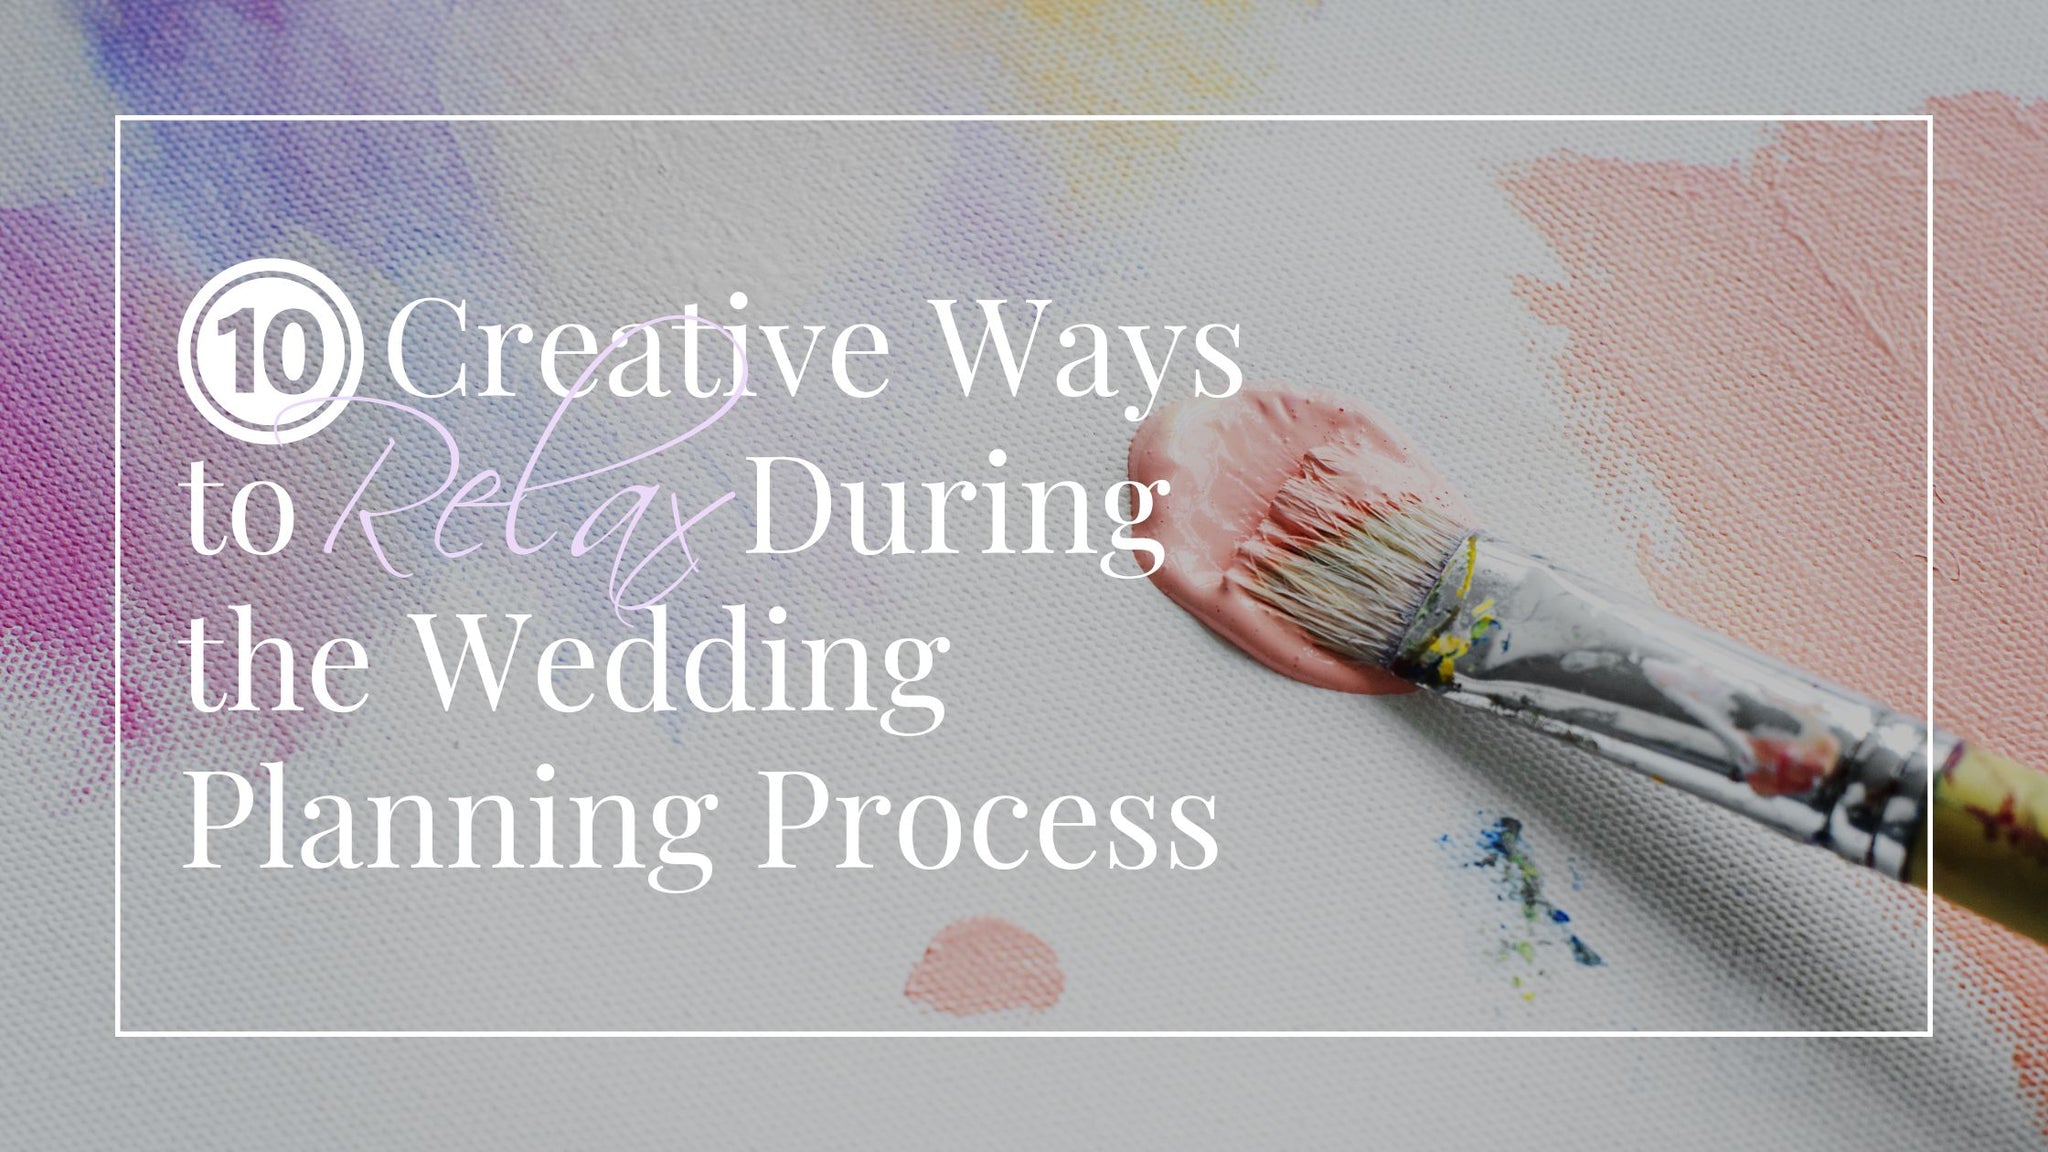 10 Creative Ways to Relax During the Wedding Planning Process